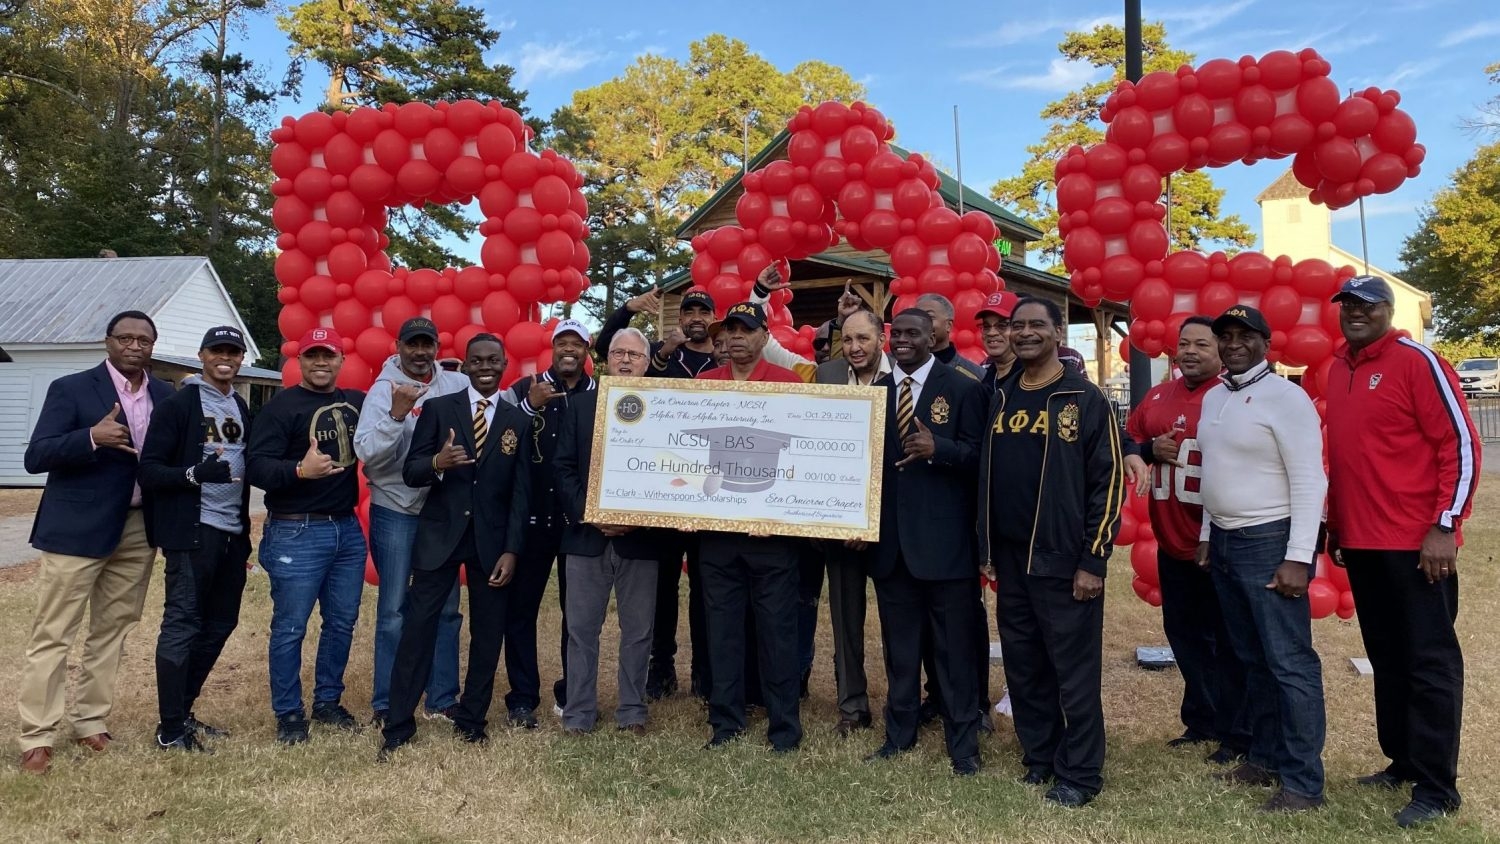 members of Alpha Phi Alpha present their scholarship to Chancellor Woodson